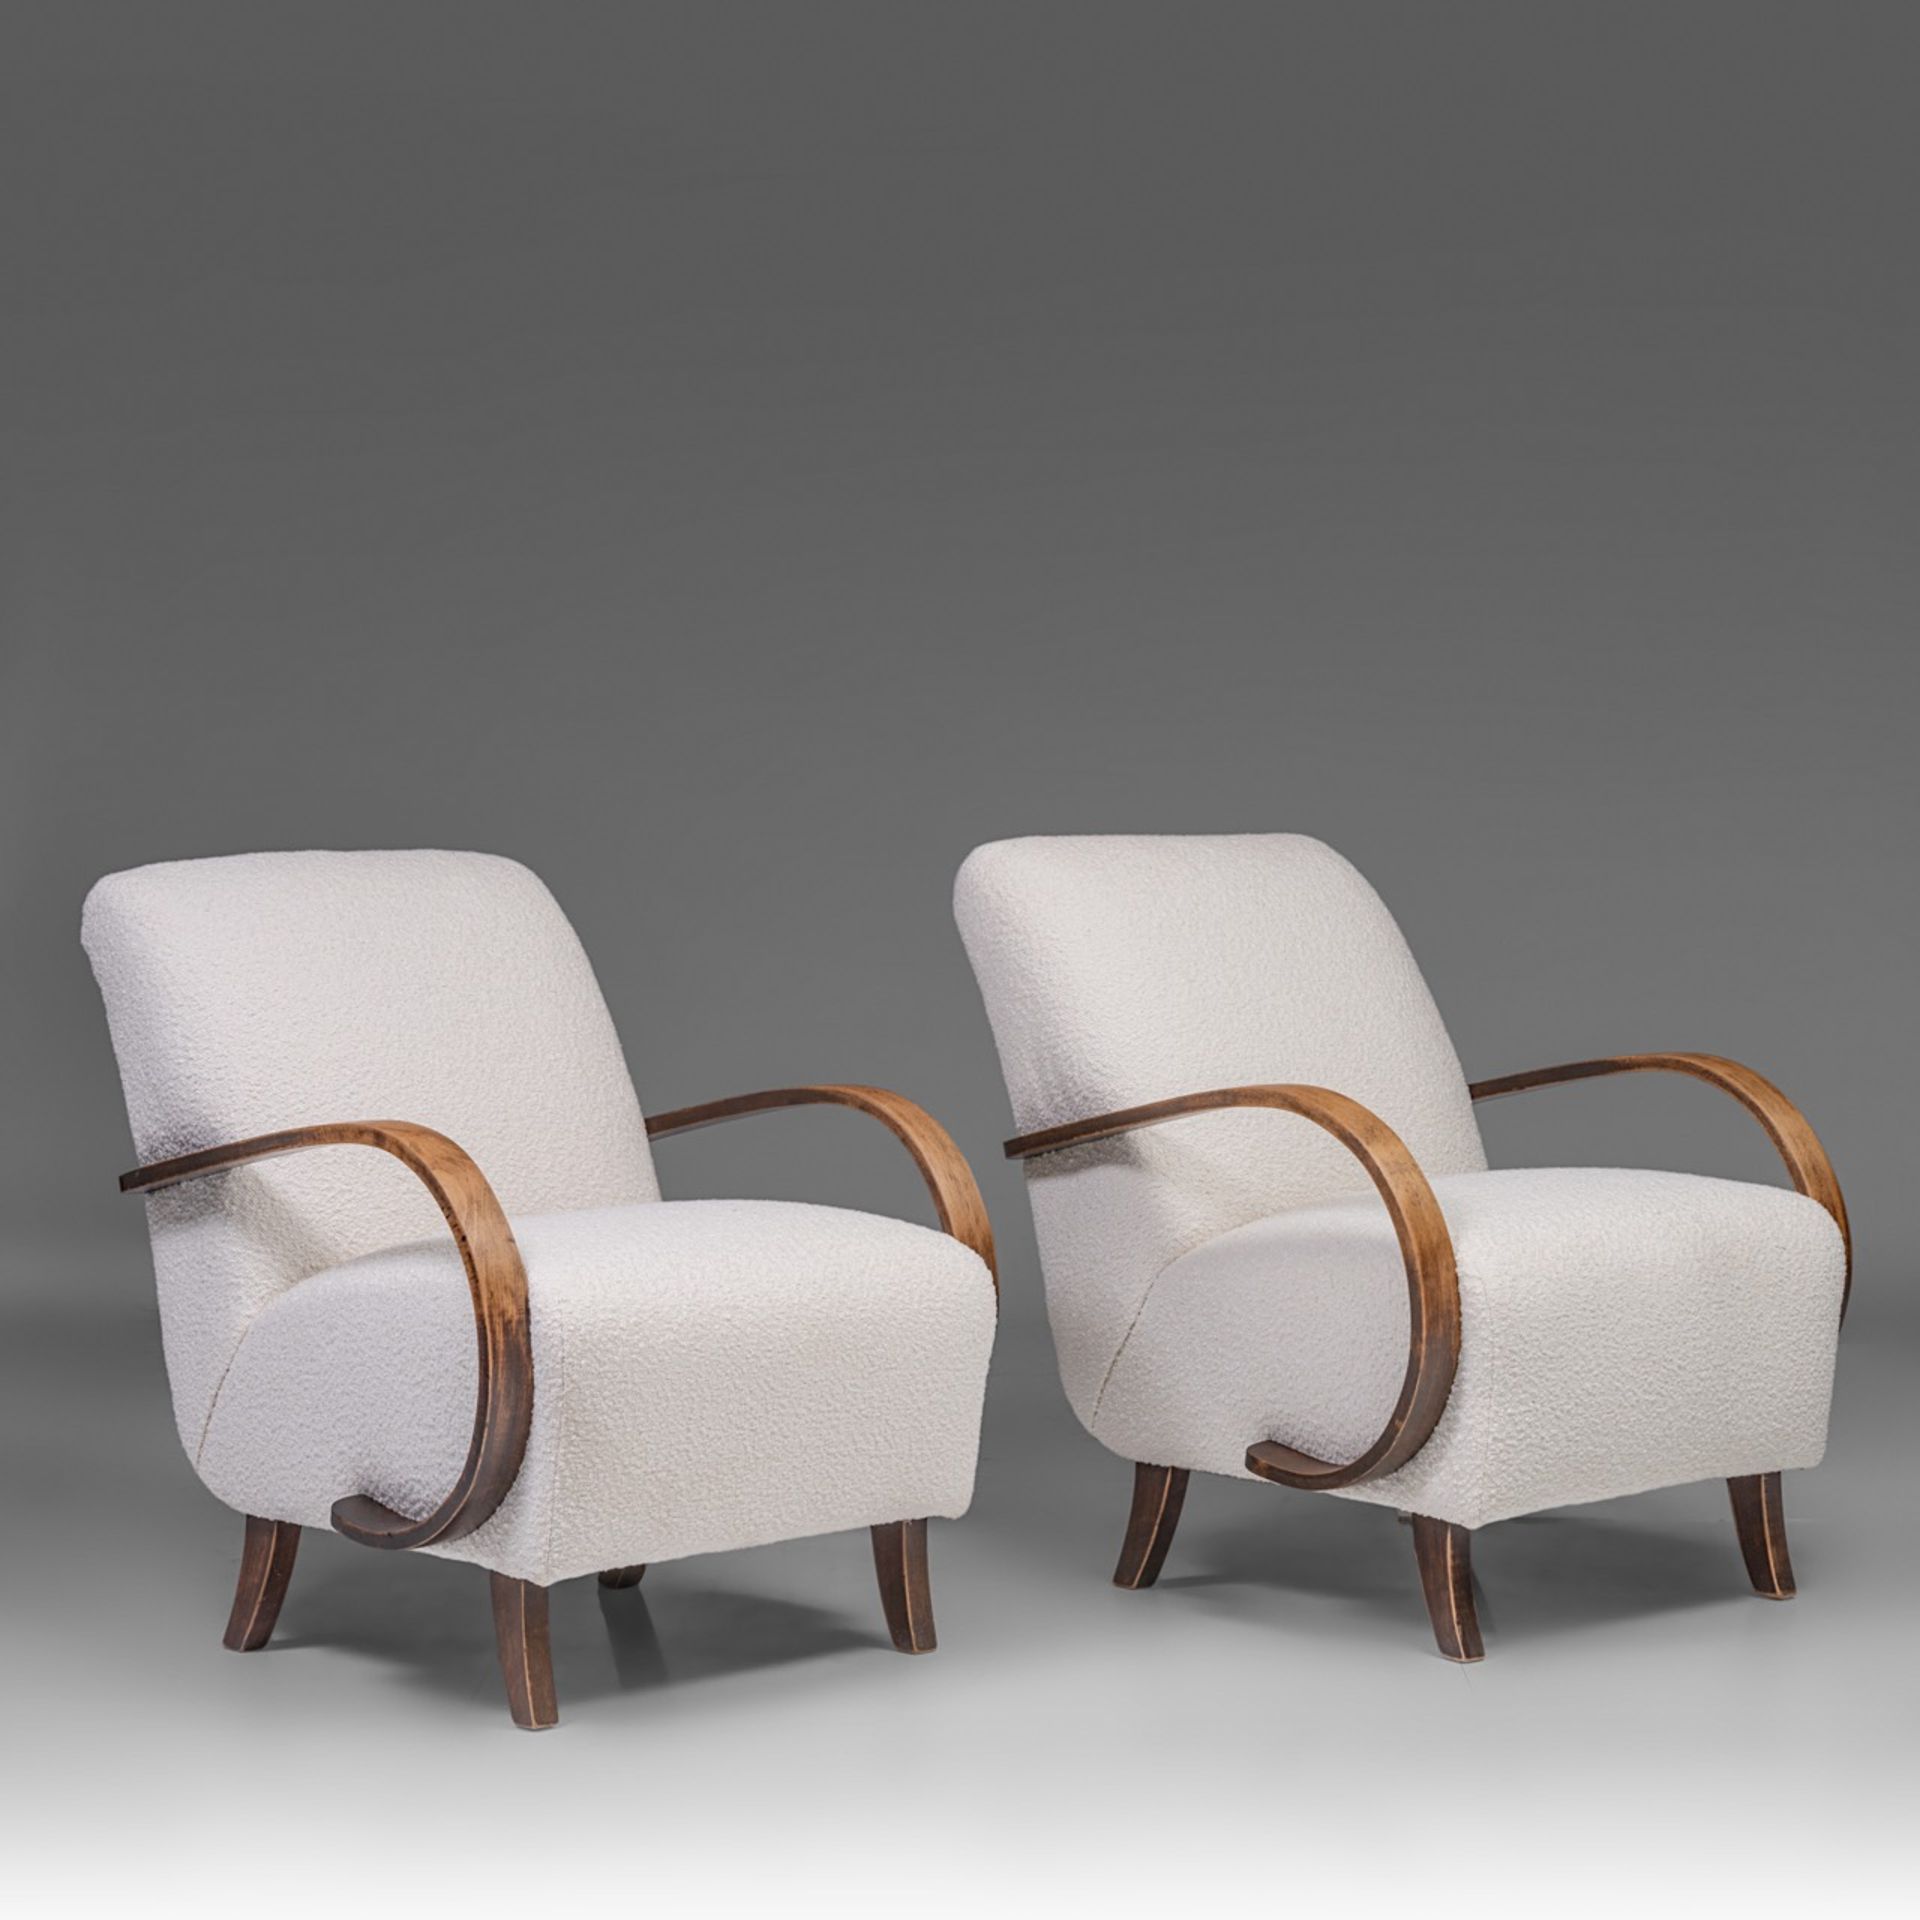 A pair of Mid-century Armchairs by Jindrich Halabala, 1950s 83 x 68 x 87 cm. (32.6 x 26.7 x 34 1/4 i - Image 2 of 13